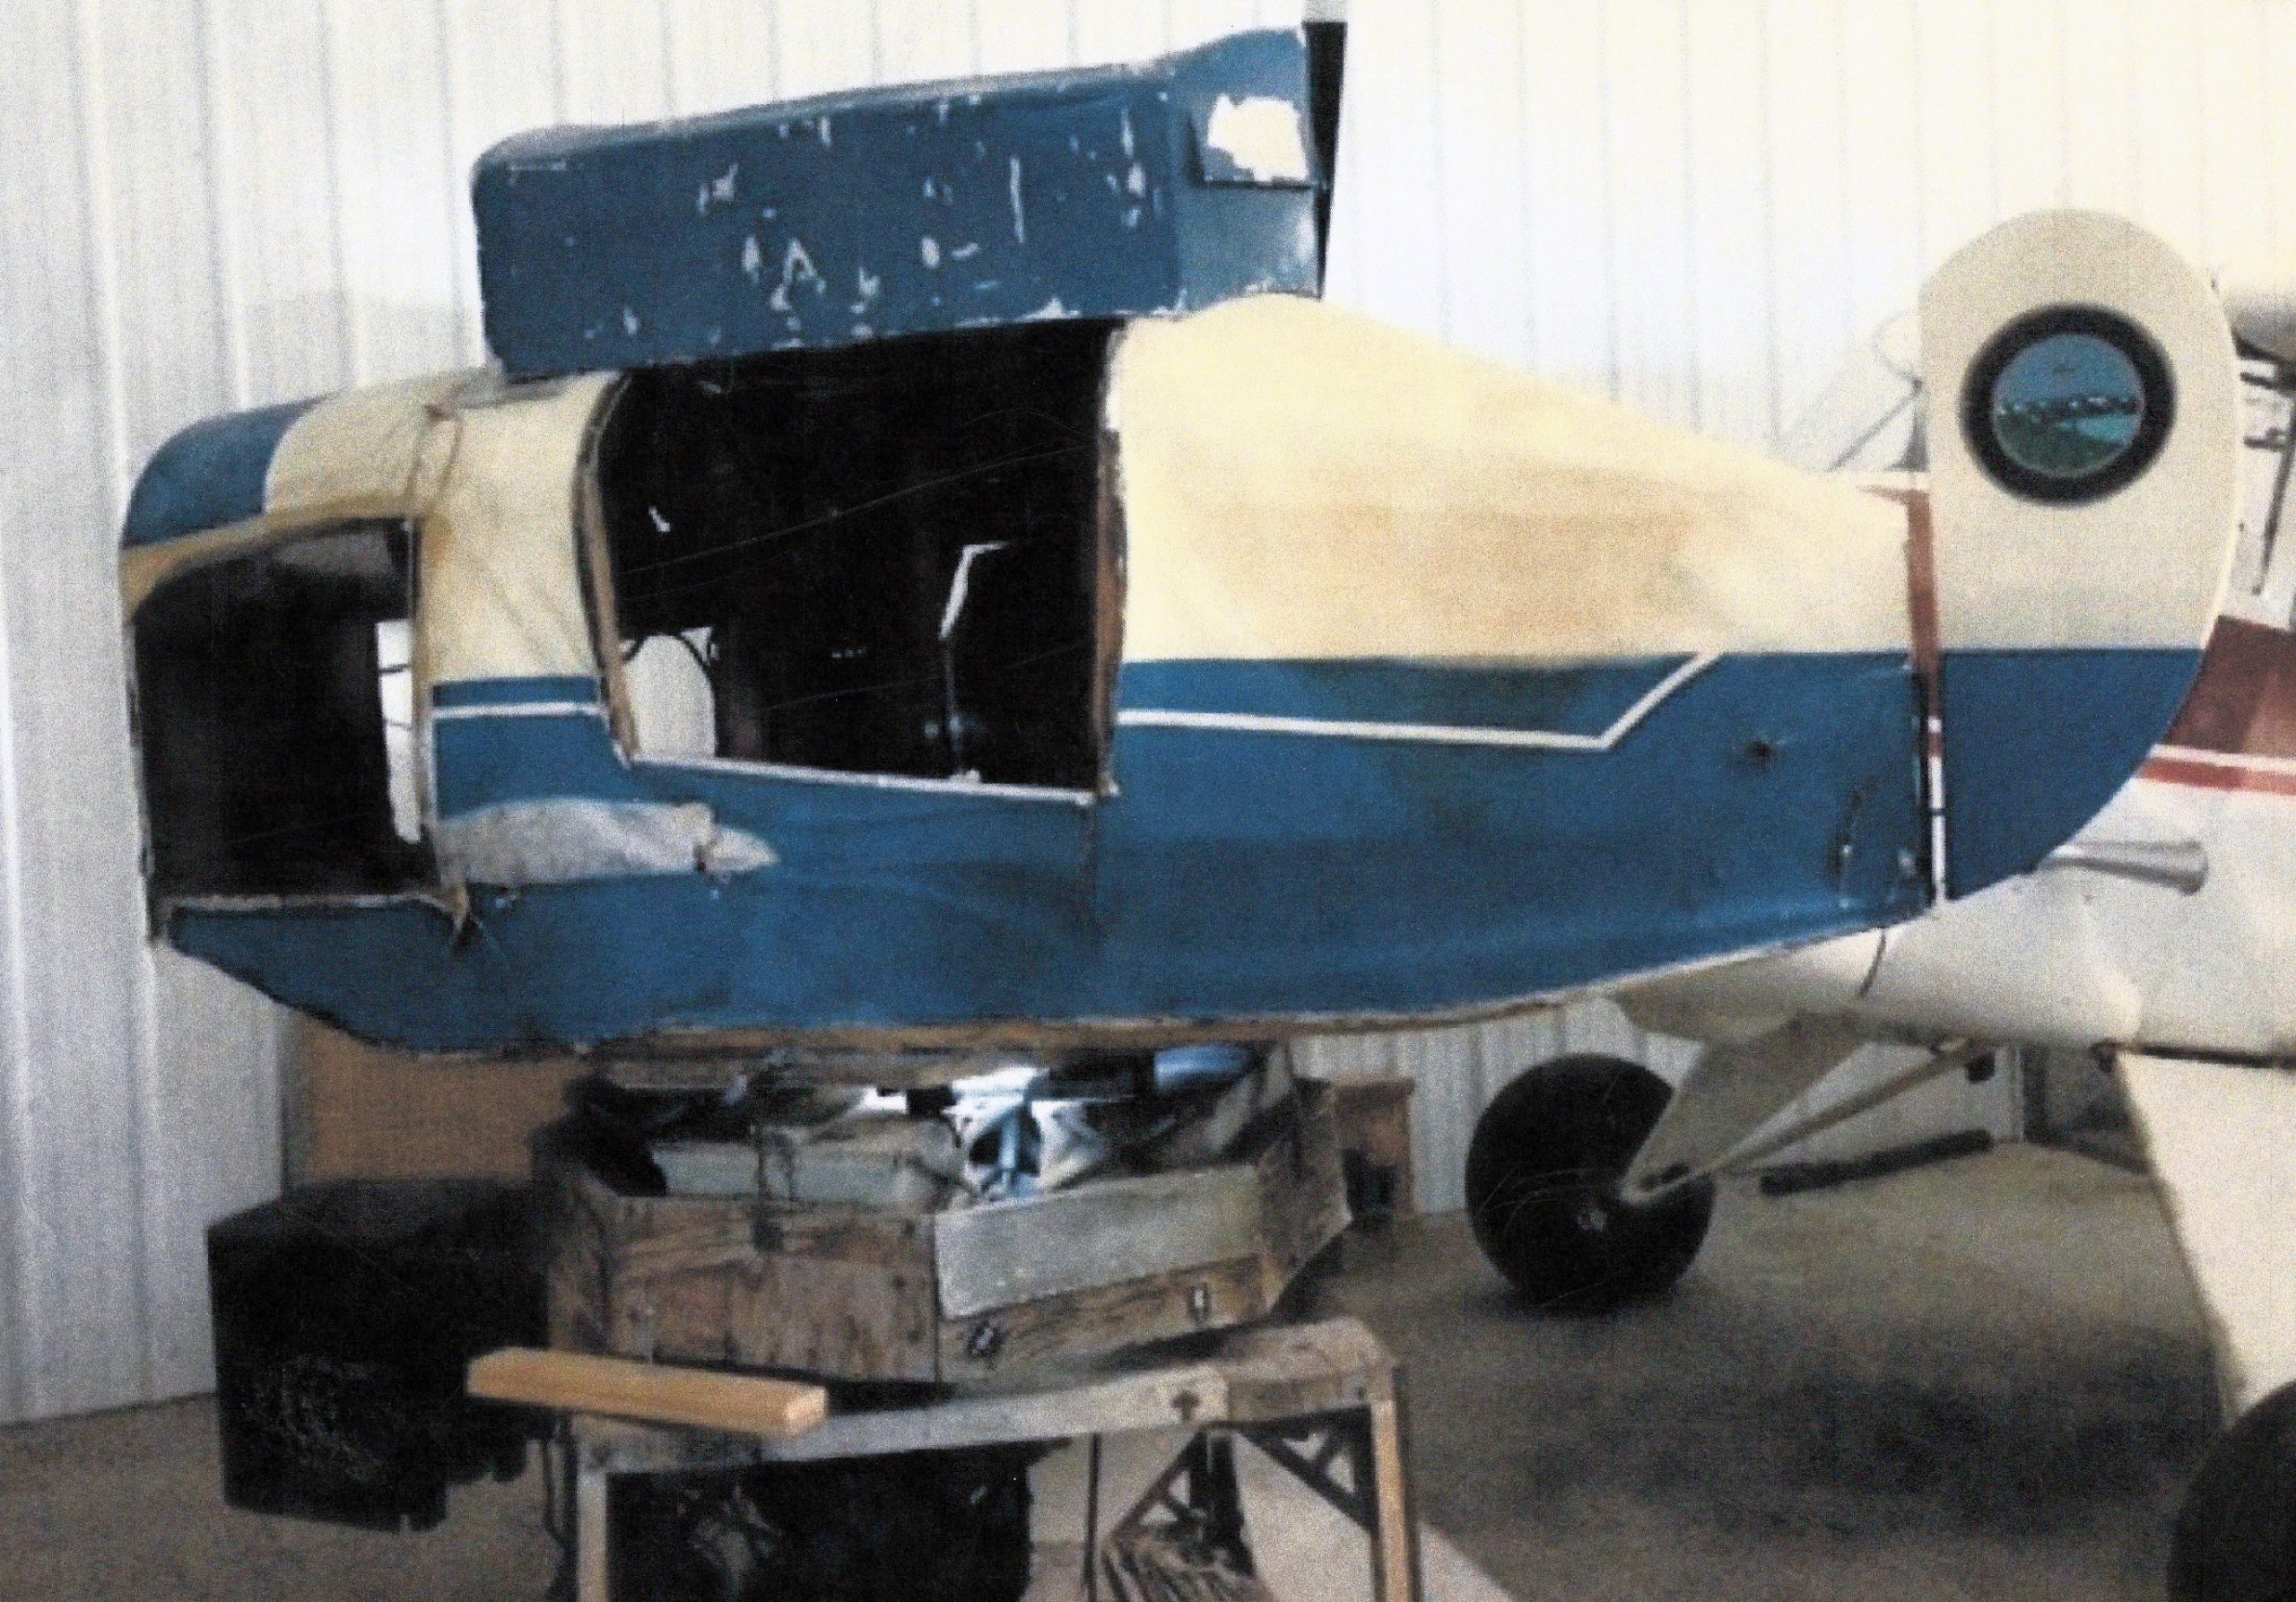 blue and white Link trainer model airplane